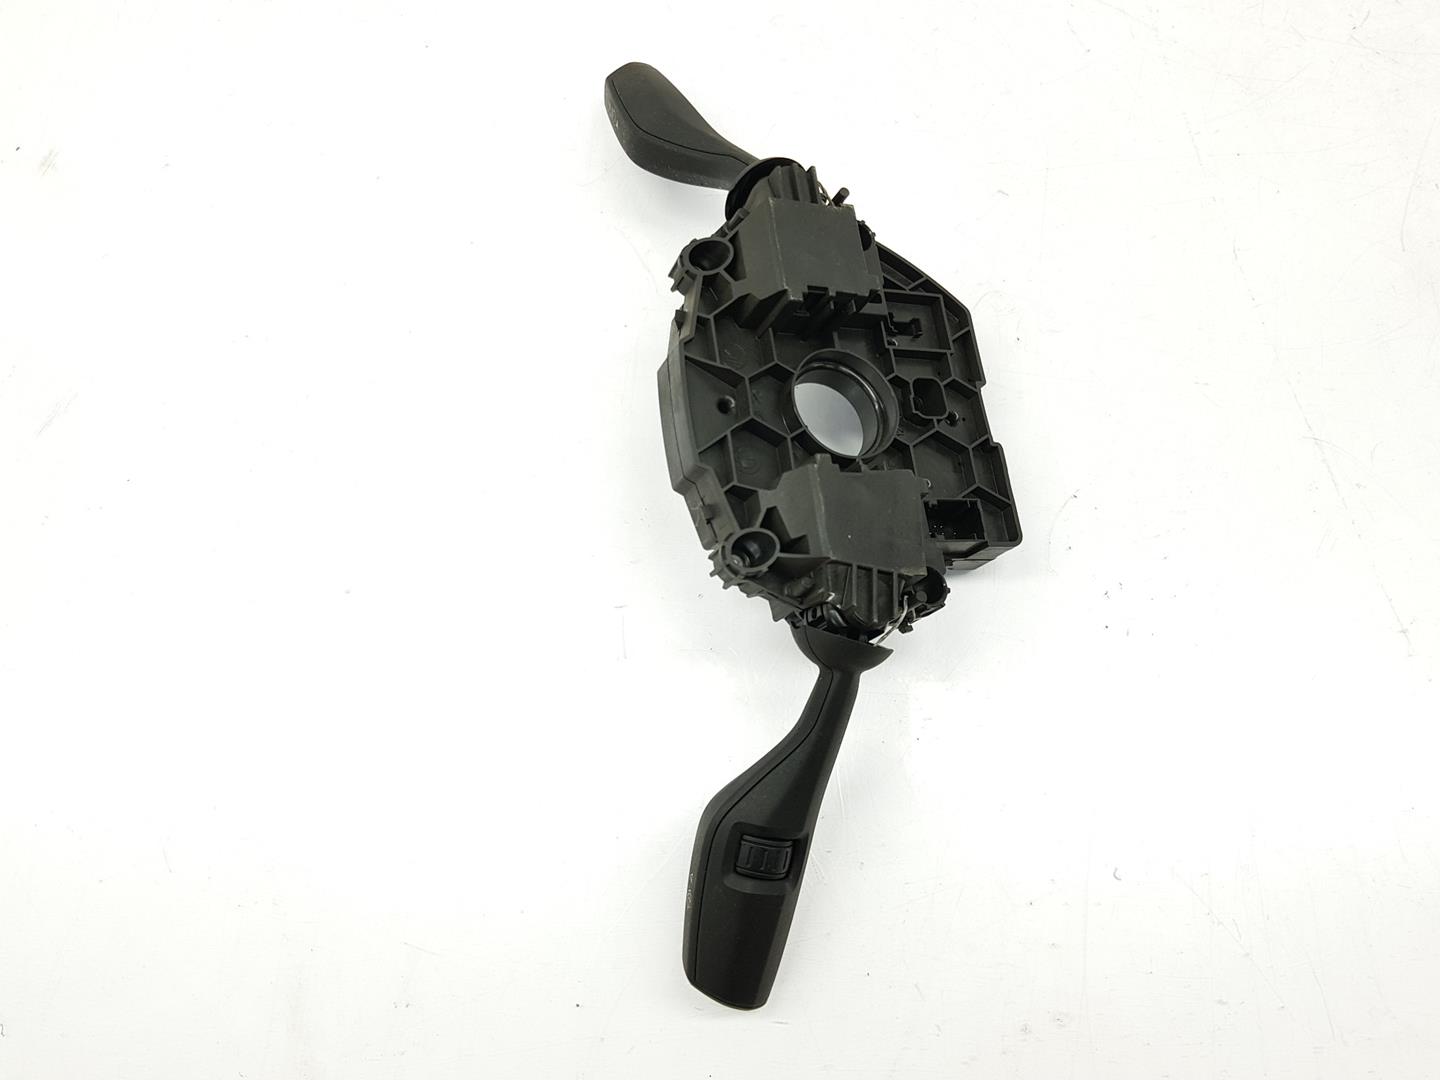 BMW 3 Series F30/F31 (2011-2020) Steering wheel buttons / switches 61315A0F928, 61315A0F928 24237723